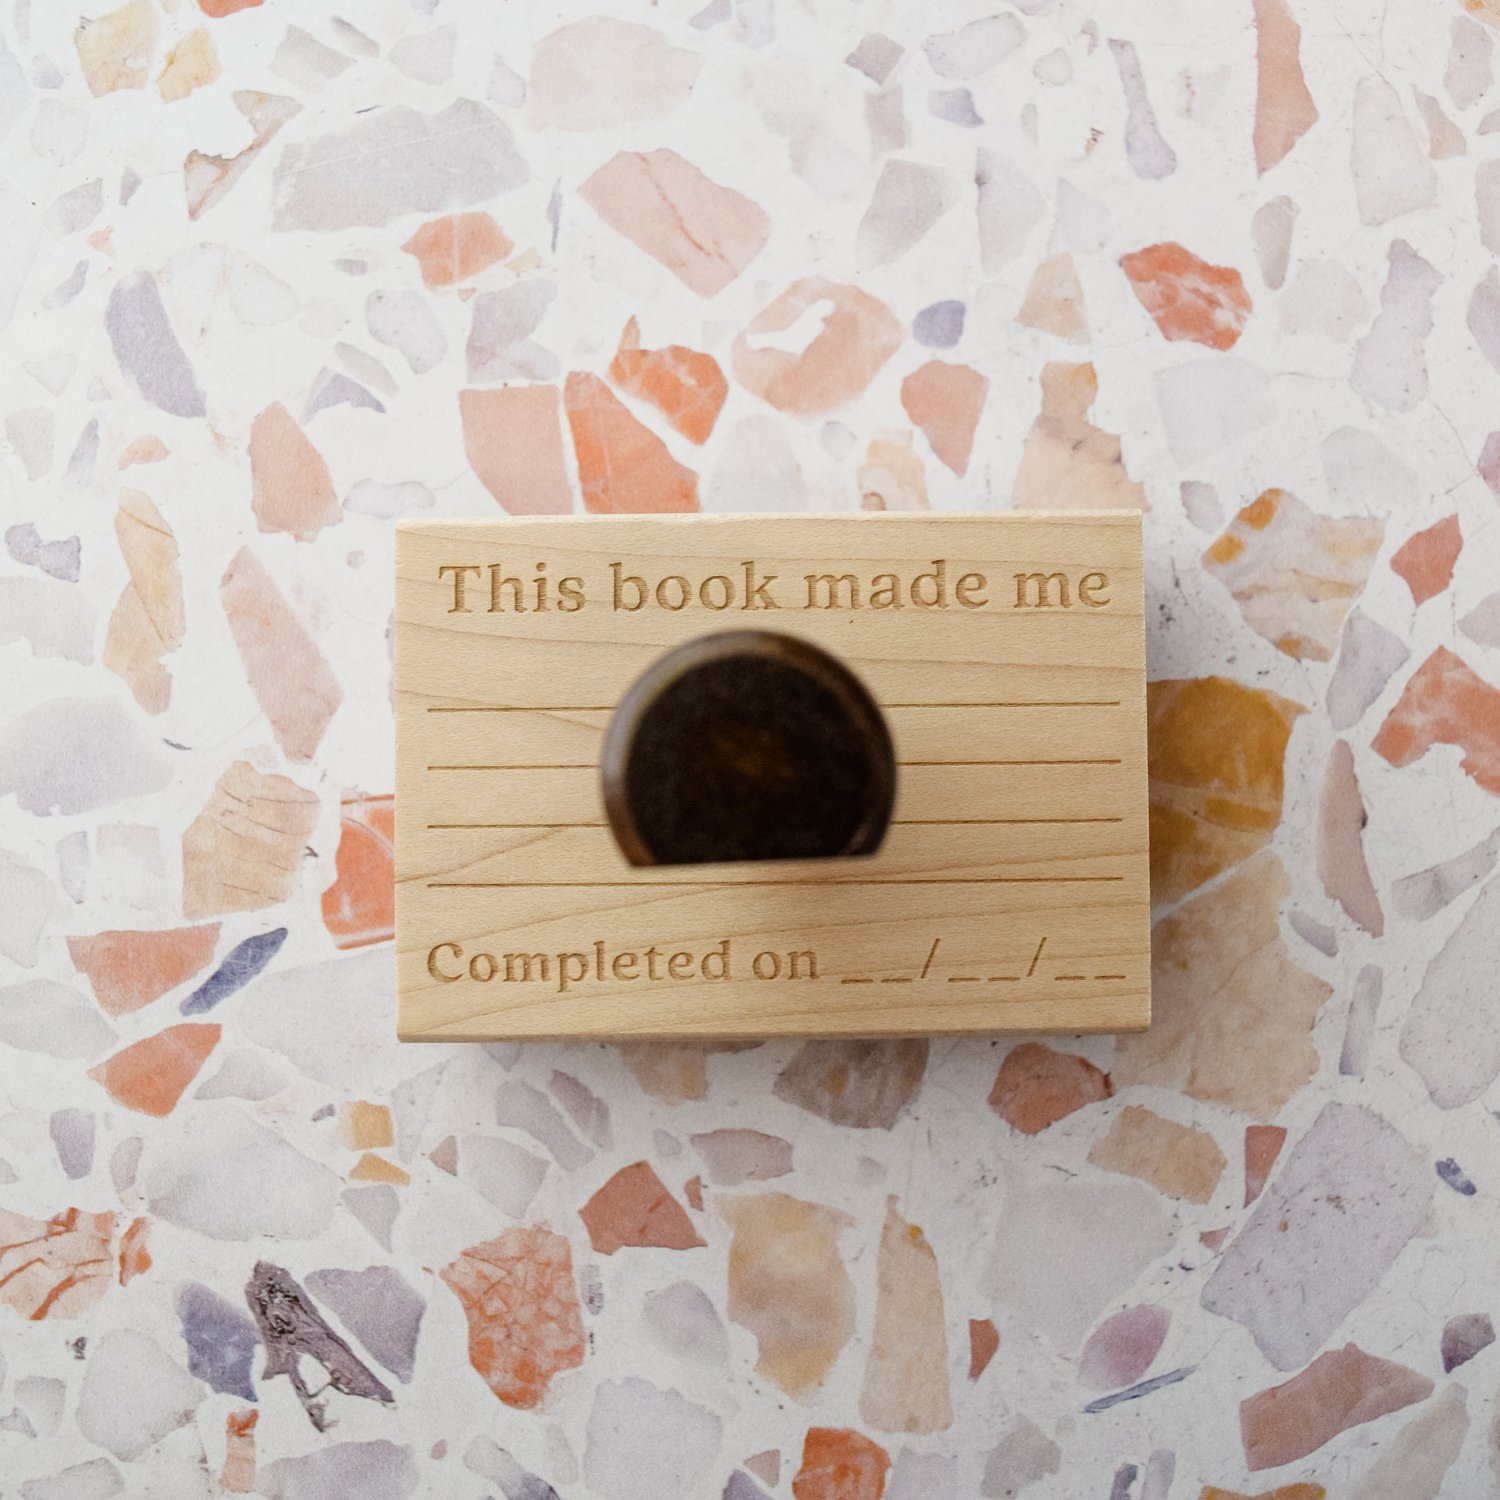 Book Journal Stamp, a Rubber Stamp for your Personal or Little Free Library  and Reading Journal designed by Modern Maker Stamps